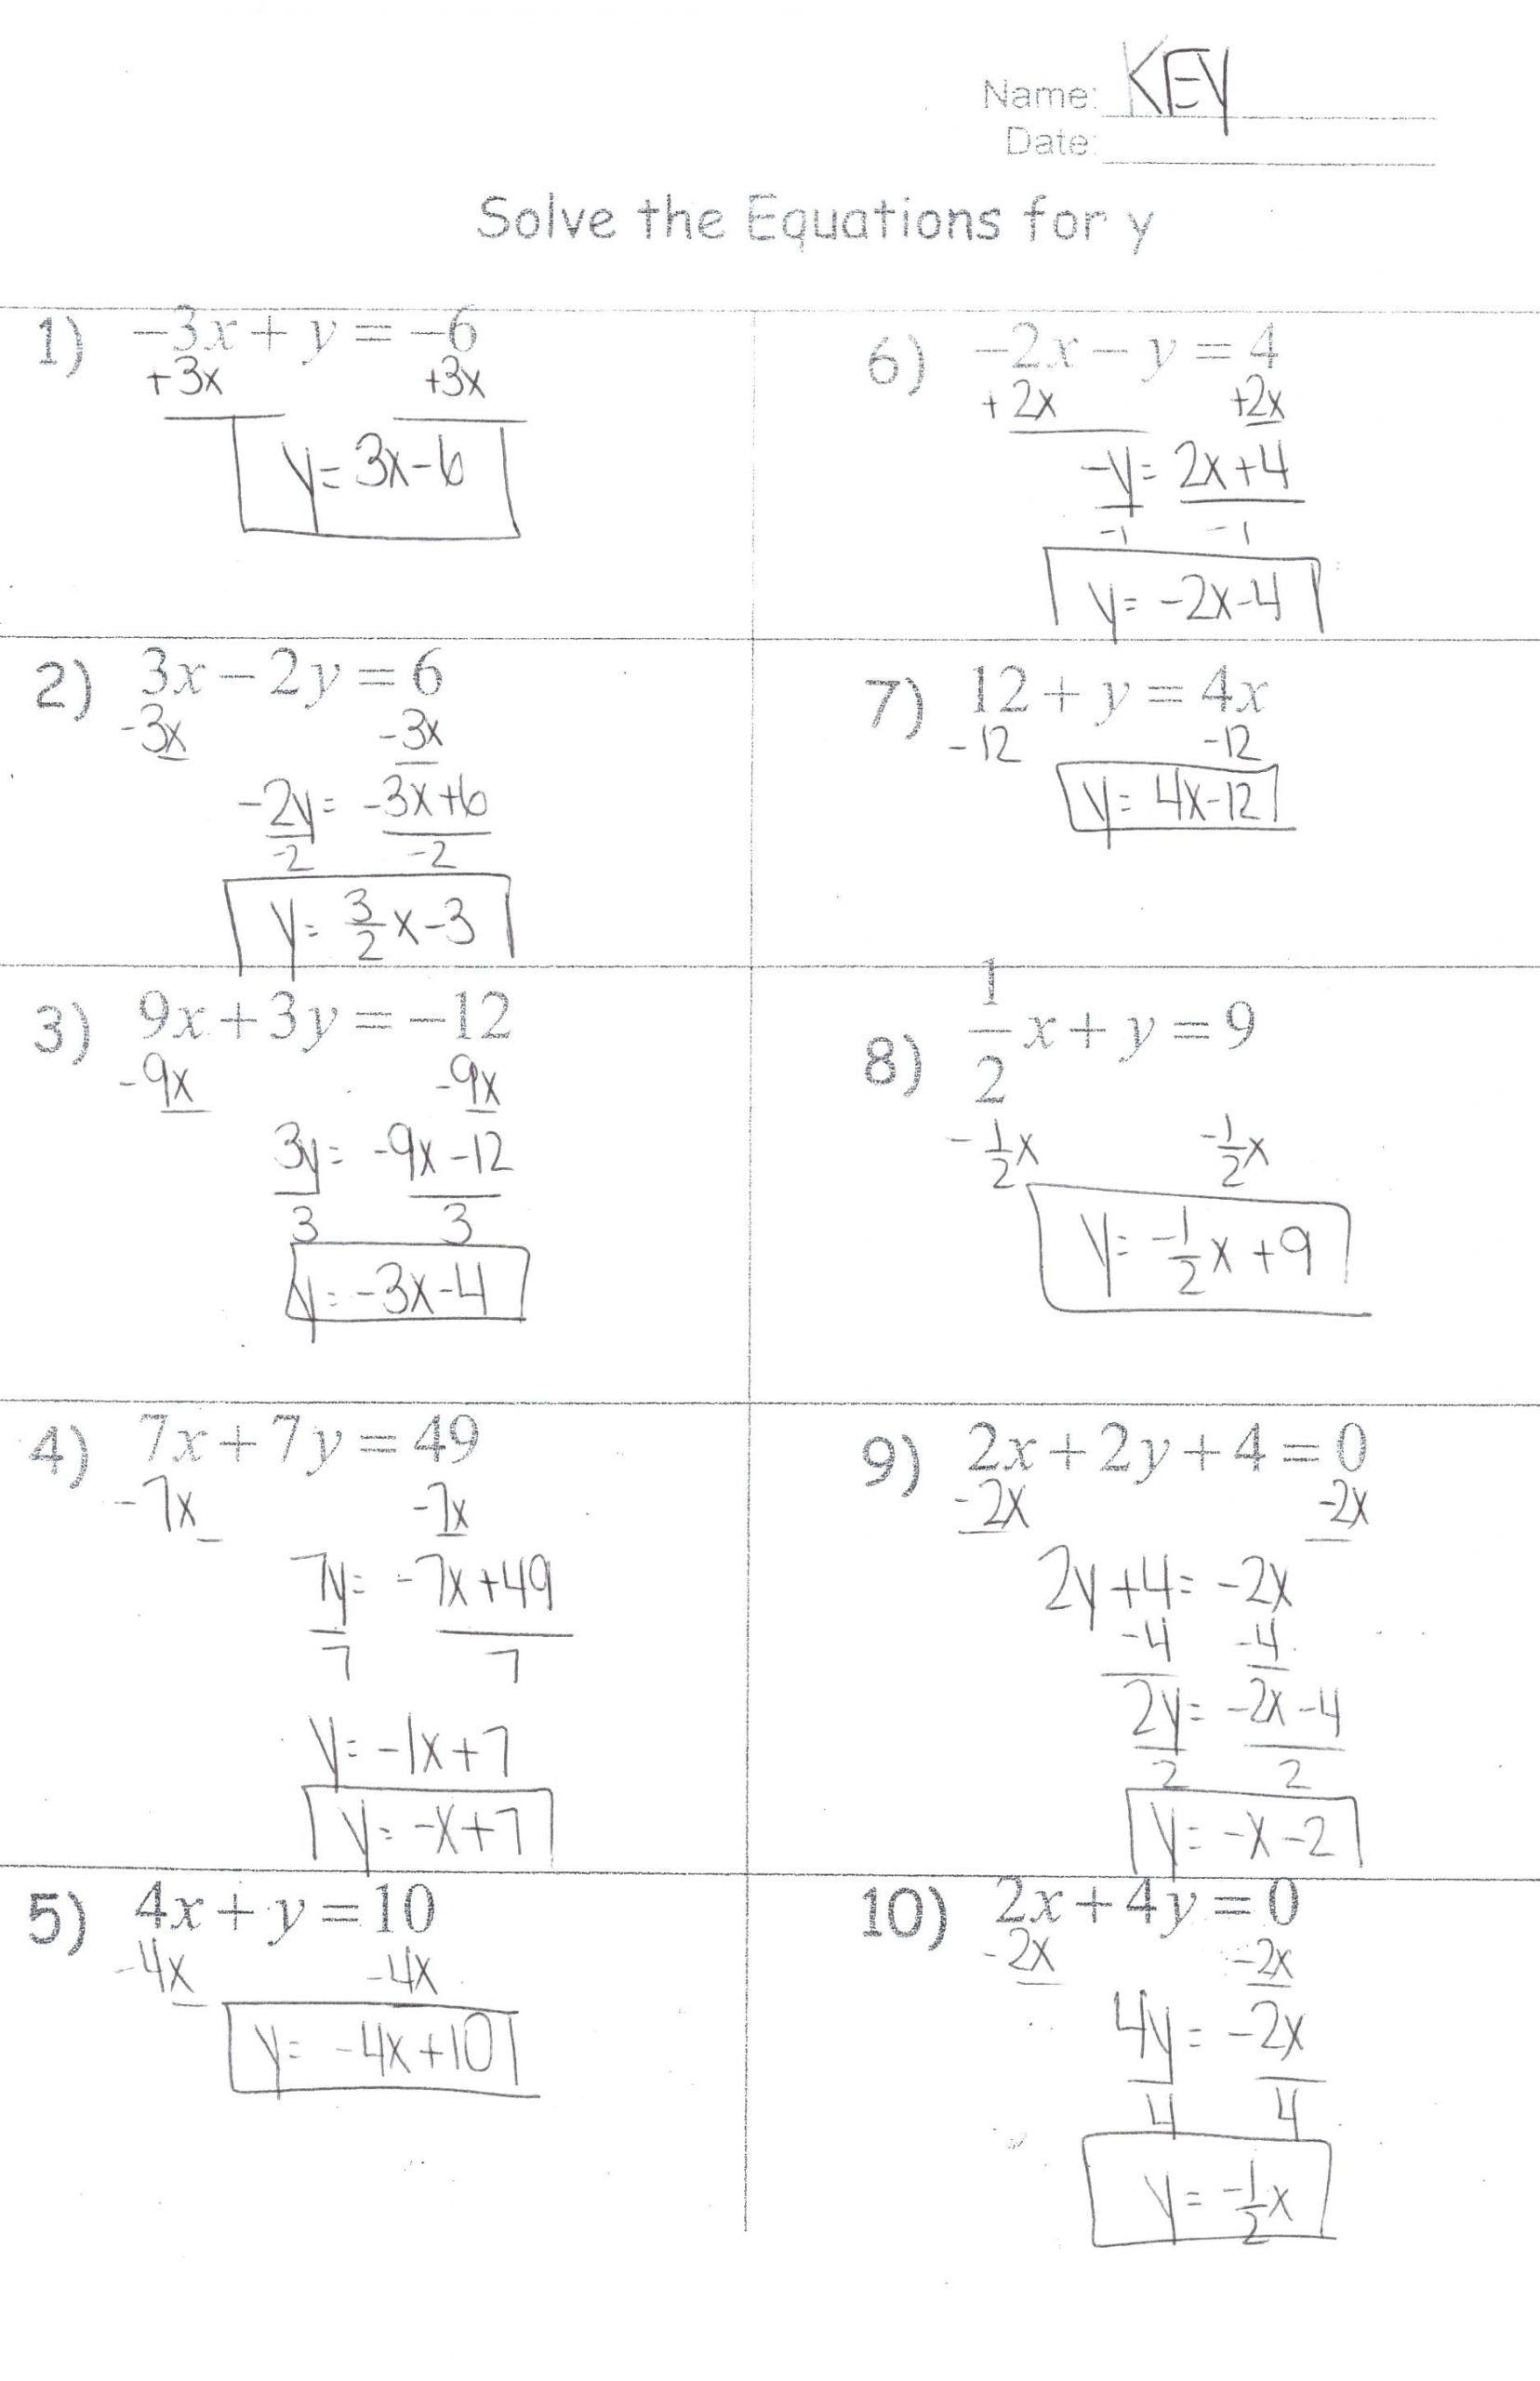 Solving Equations and Inequalities Worksheet Equations and Inequalities Worksheet with Answers Nidecmege